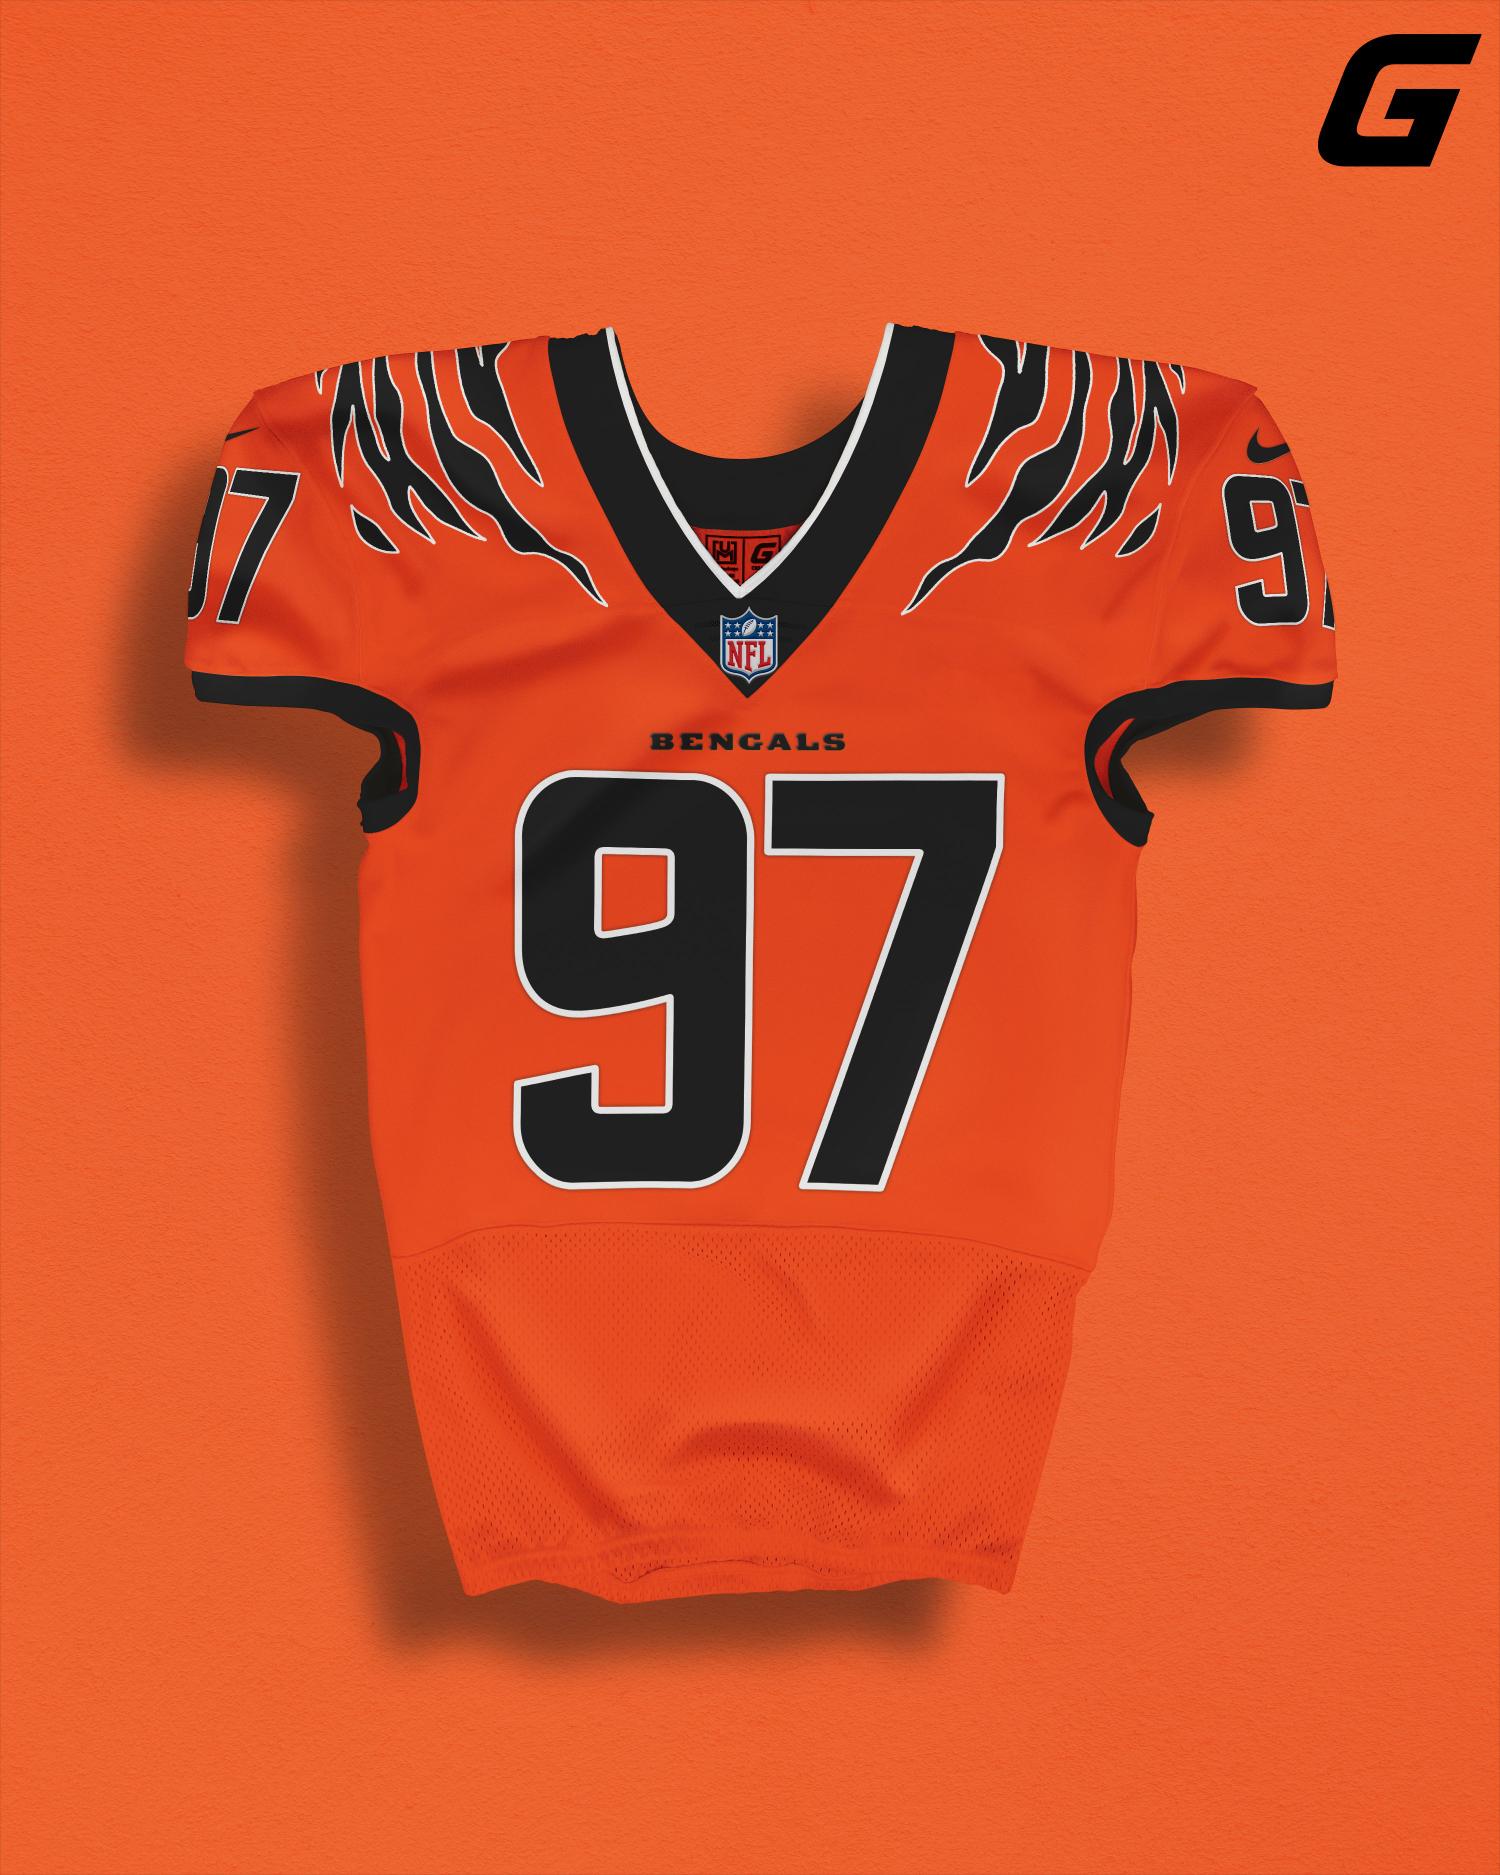 Jersey Change? - Page 3 - THE BENGALS FORUM - For Bengals Fans ...